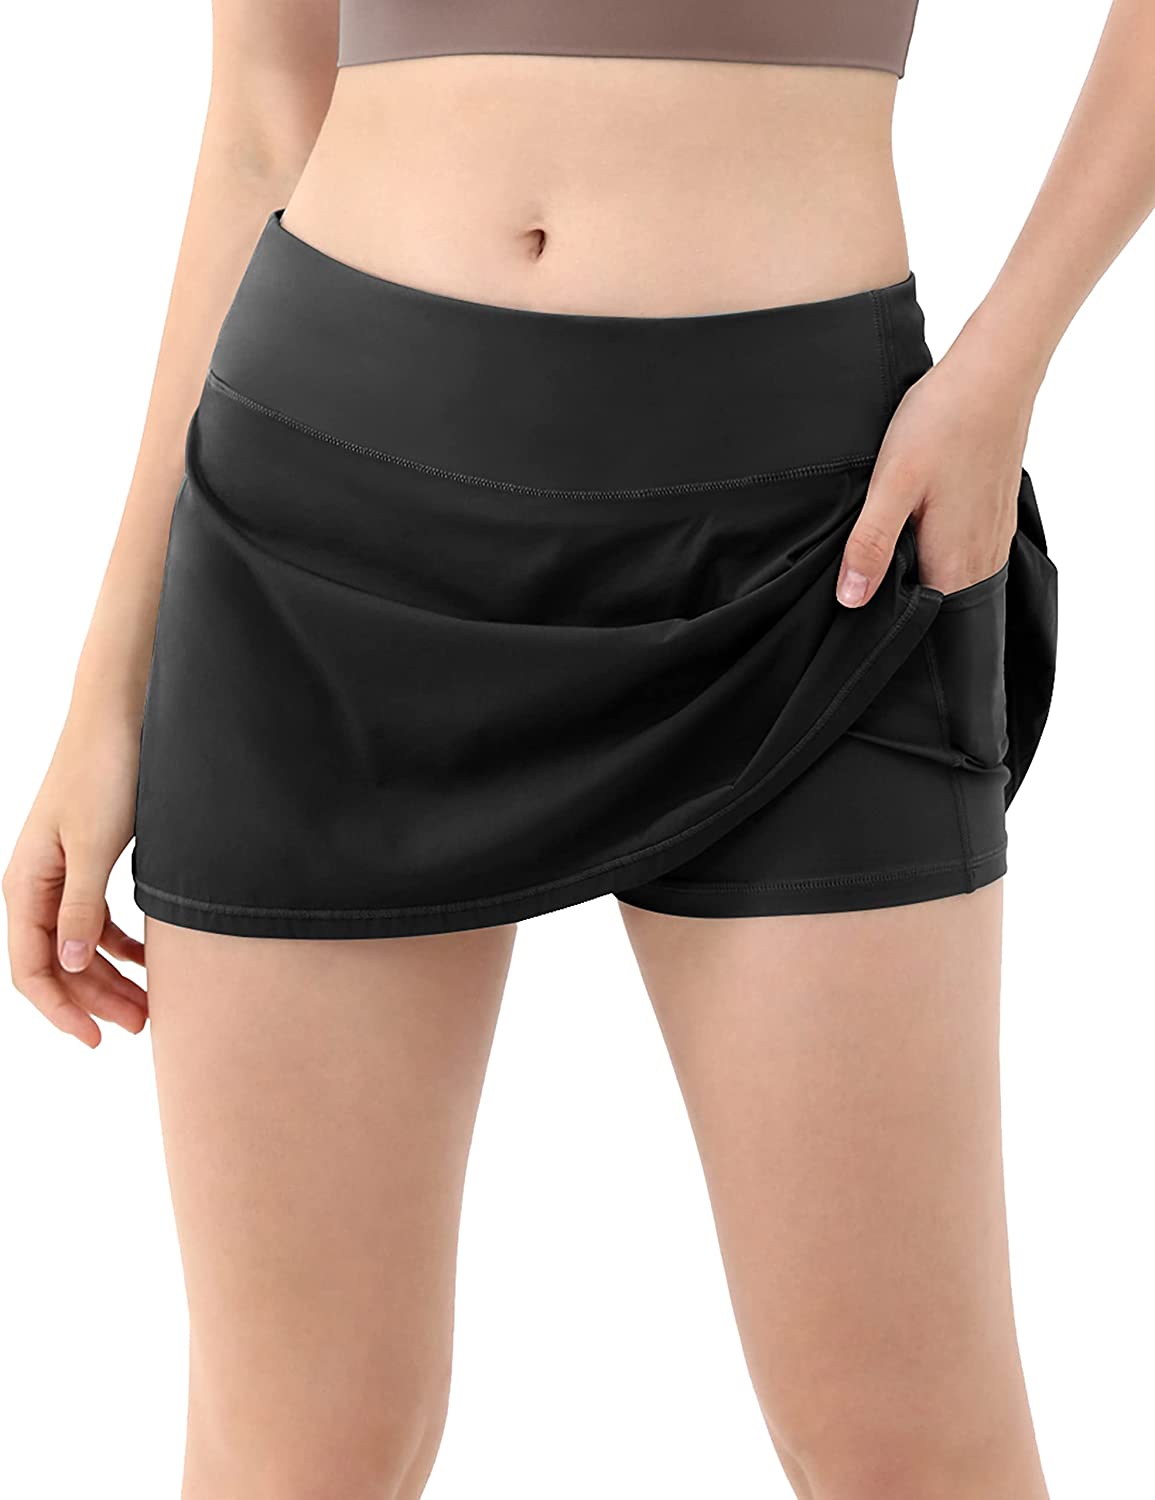 ododos Tennis Skirts With Built In Pockets Size S Black BNWT(s)